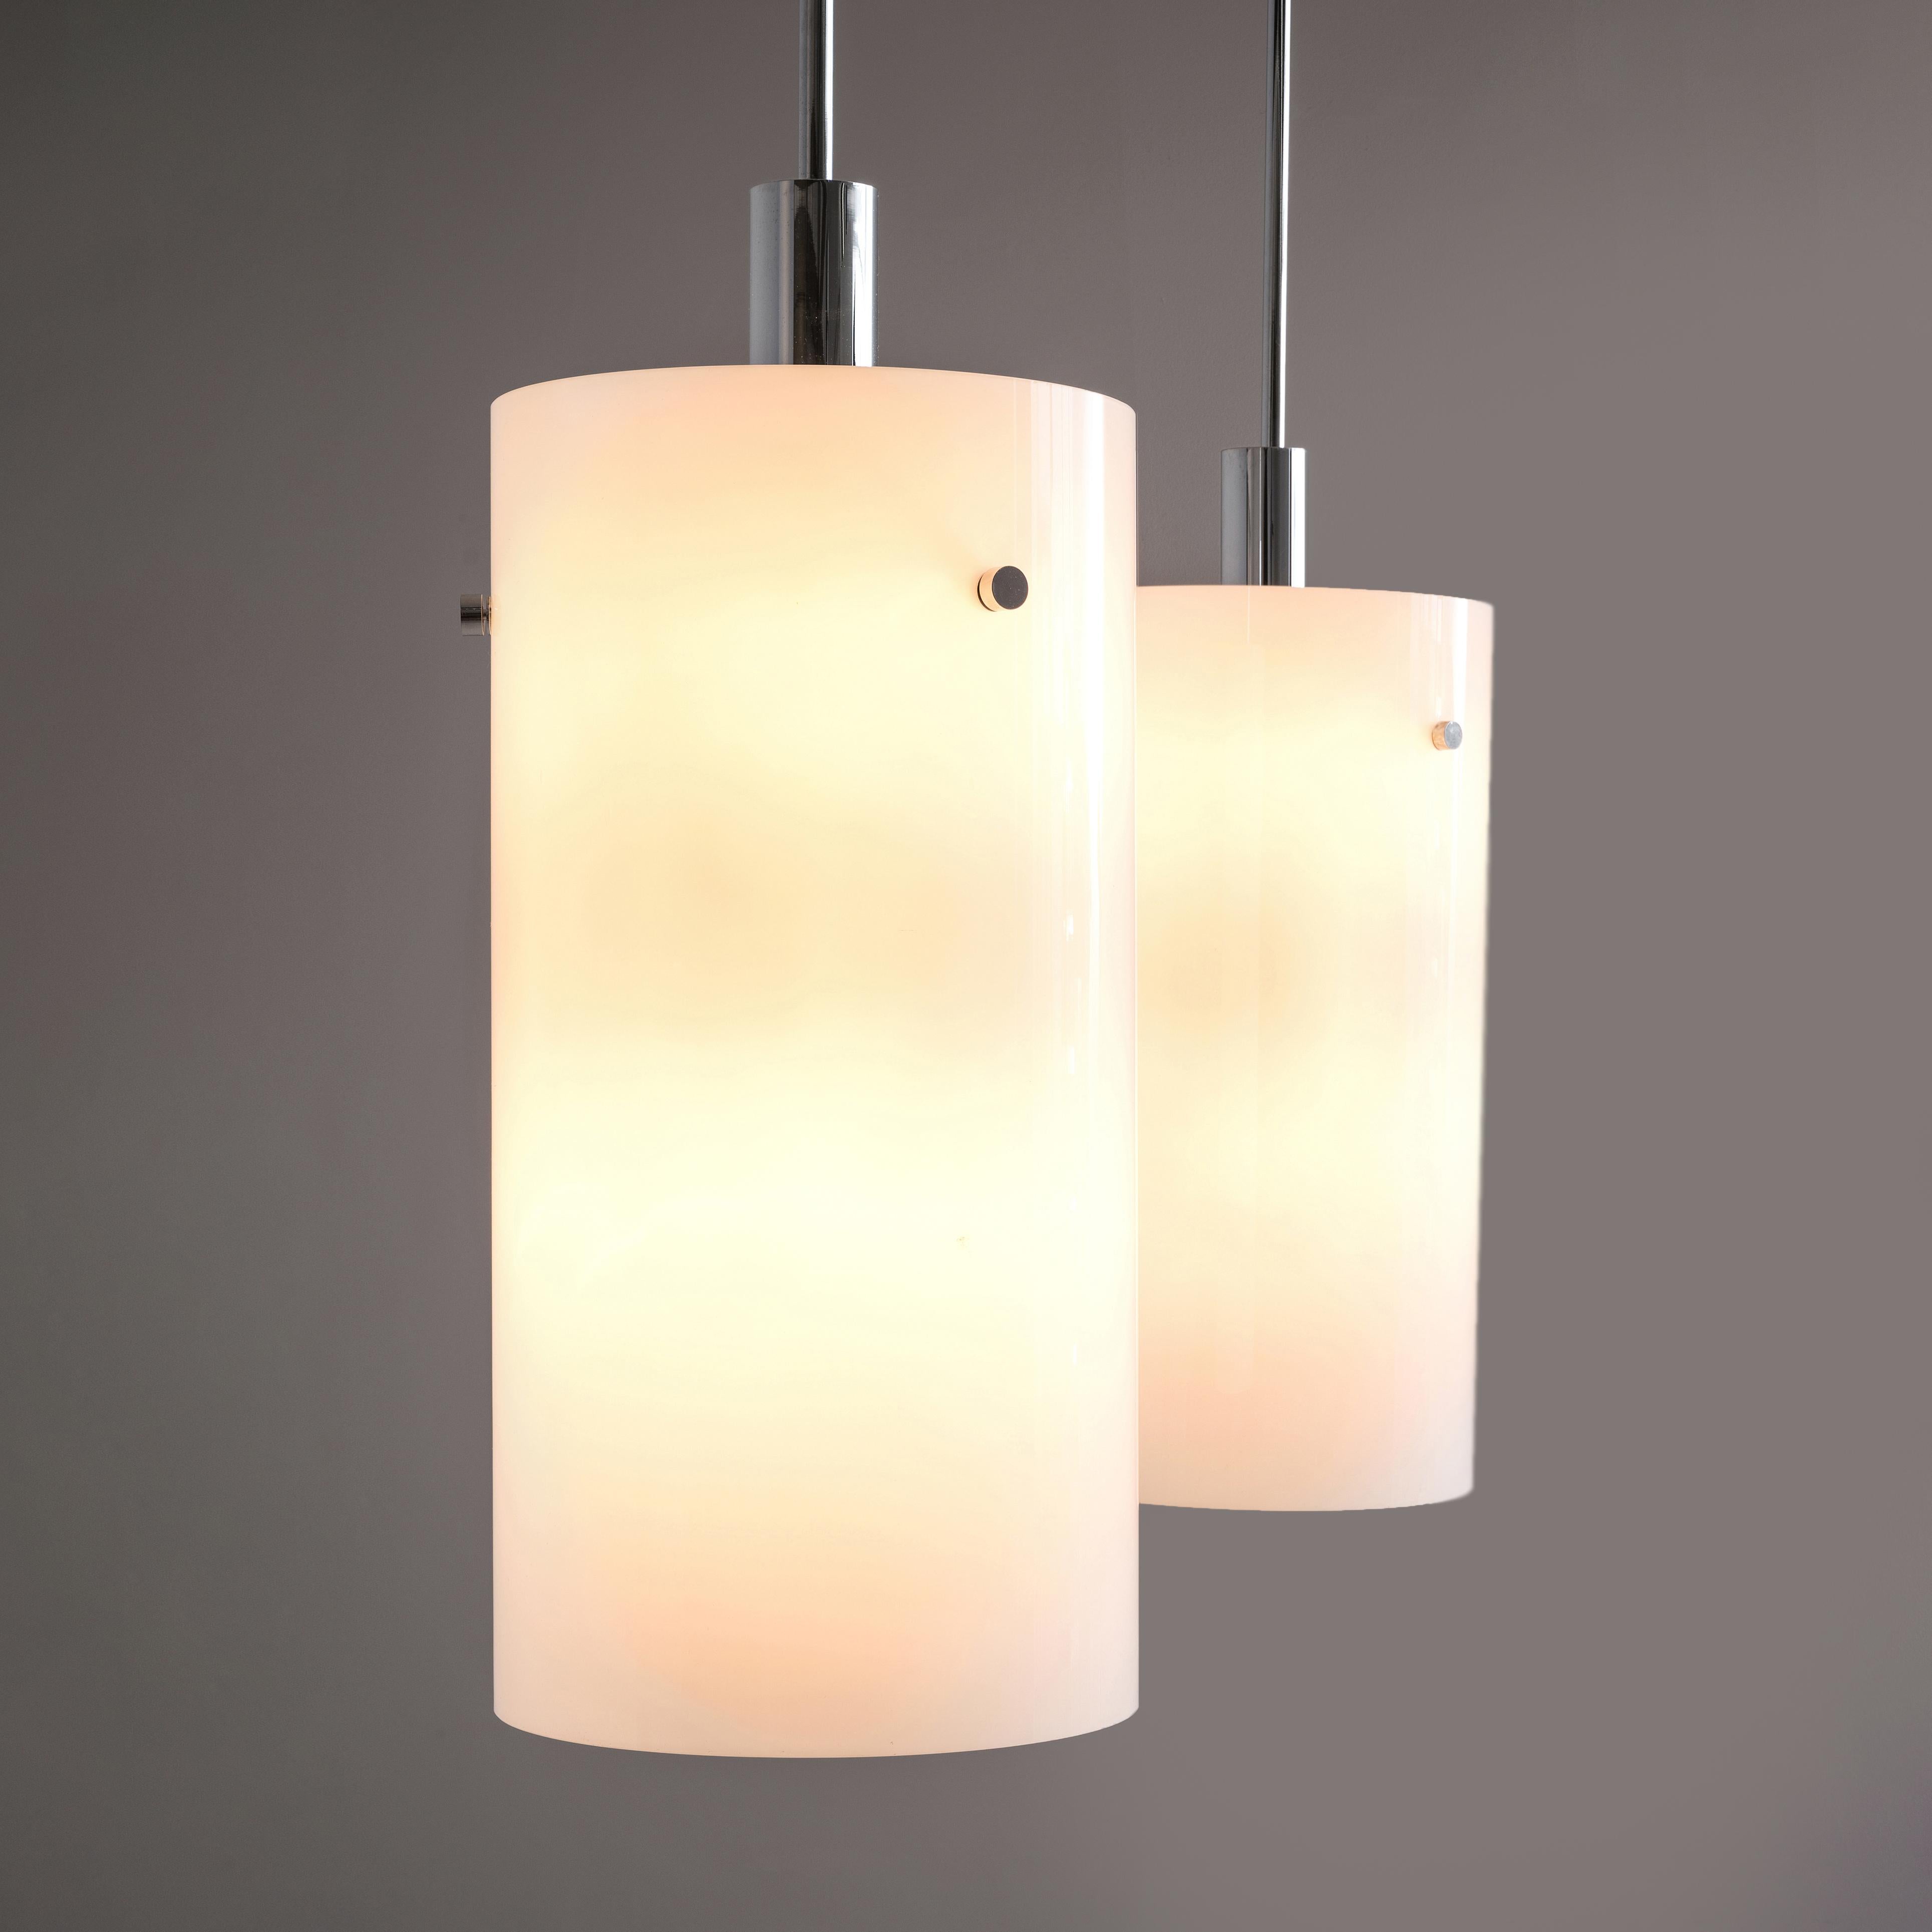 Pendants, metal, glass, Europe, 1970s

This set of atmospheric pendants are cylindrically shaped and executed in white glass, which results in a nice soft light-tone creating a lively ambience in the room. The fixture is based on a minimalist design